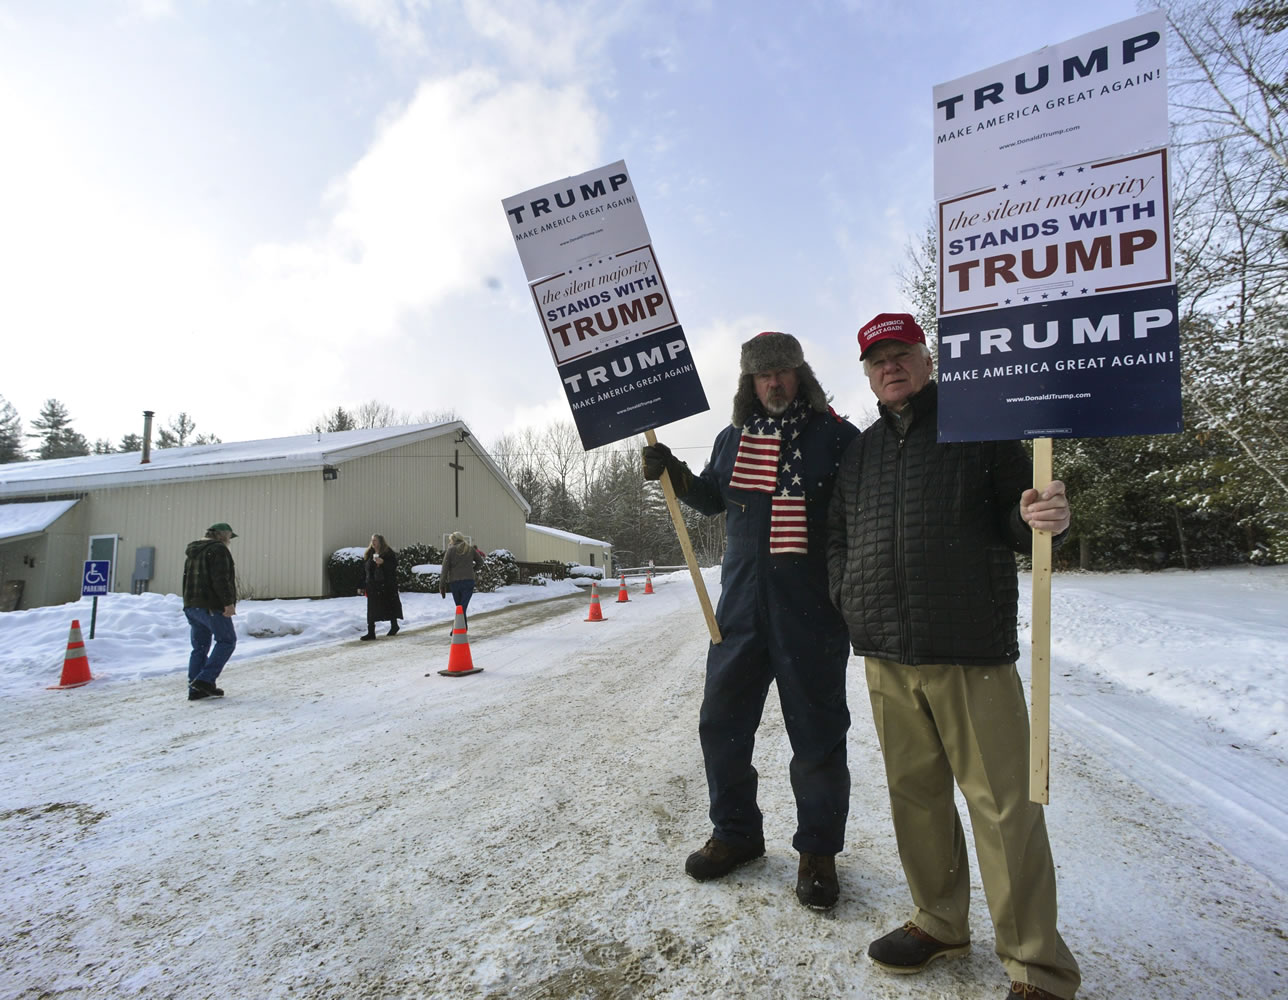 James Wall and H. Gregory Johnson, from Swanzey, N.H., hold signs of support for Republican presidential candidate Donald Trump outside the Swanzey, N.H. polling station during the New Hampshire primary on Tuesday.